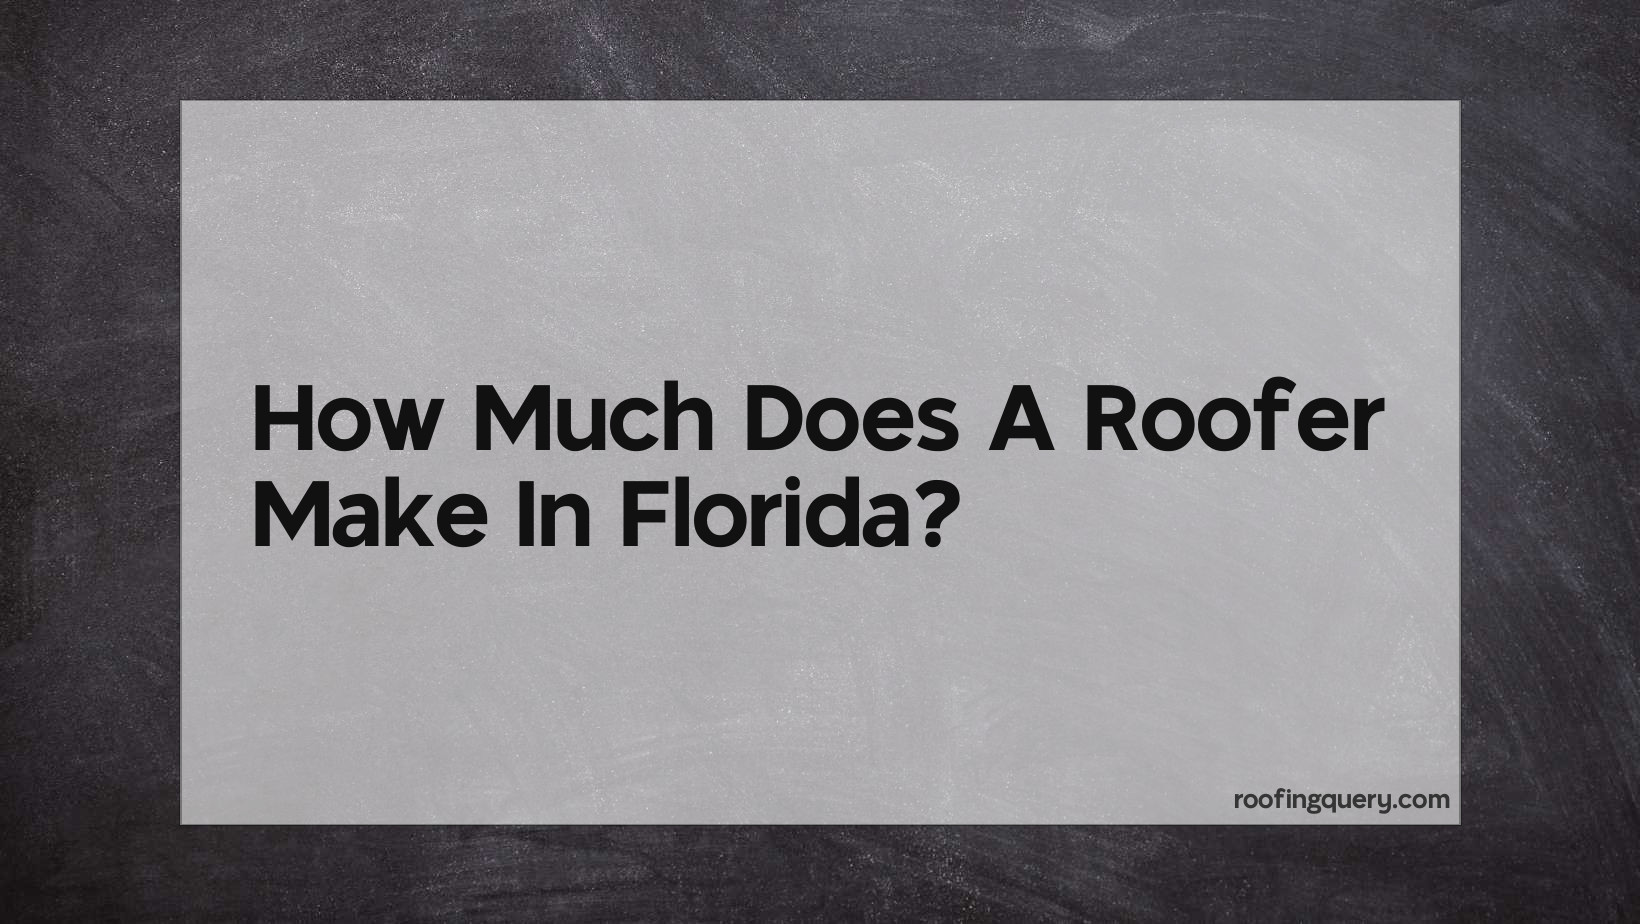 How Much Does A Roofer Make In Florida?